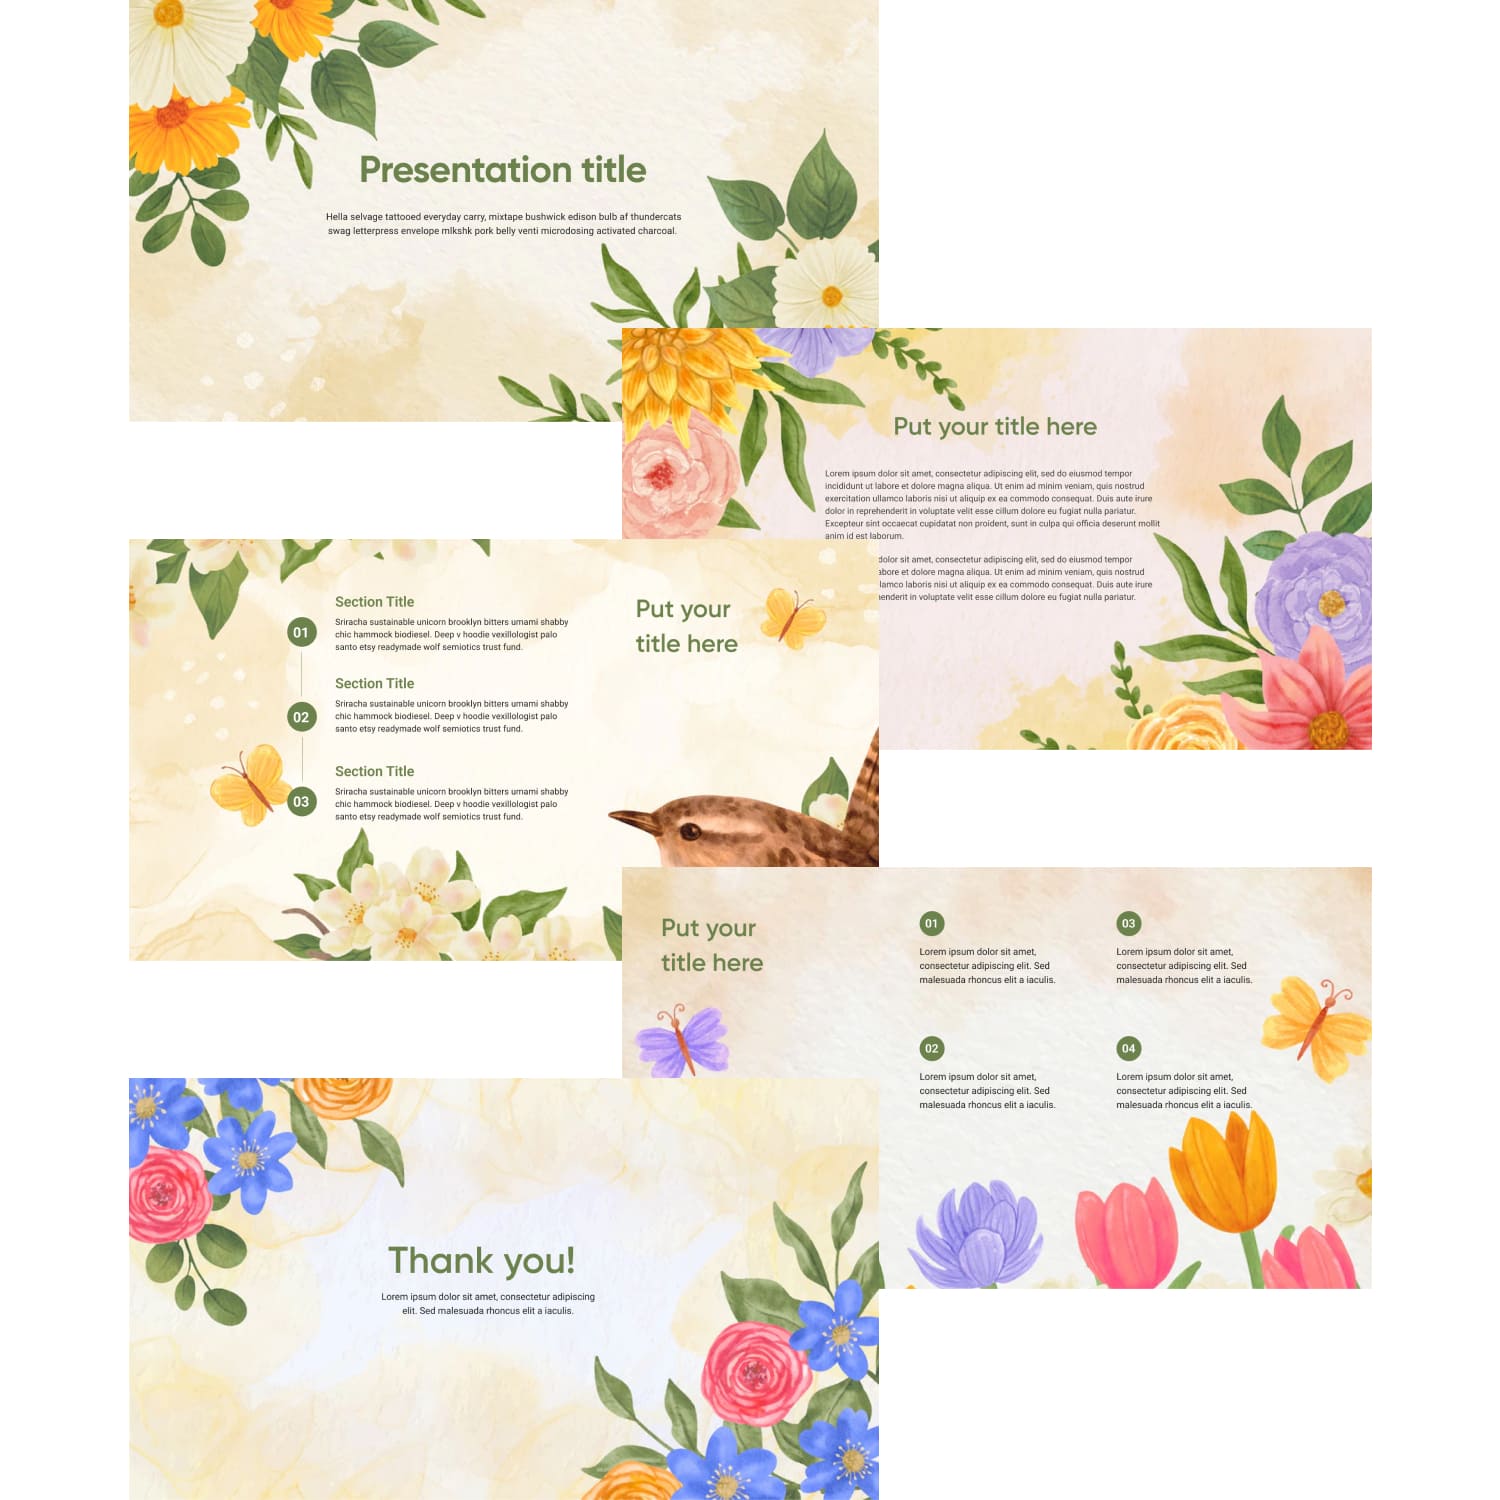 Pastel Spring Flowers Powerpoint Template Free Cover.